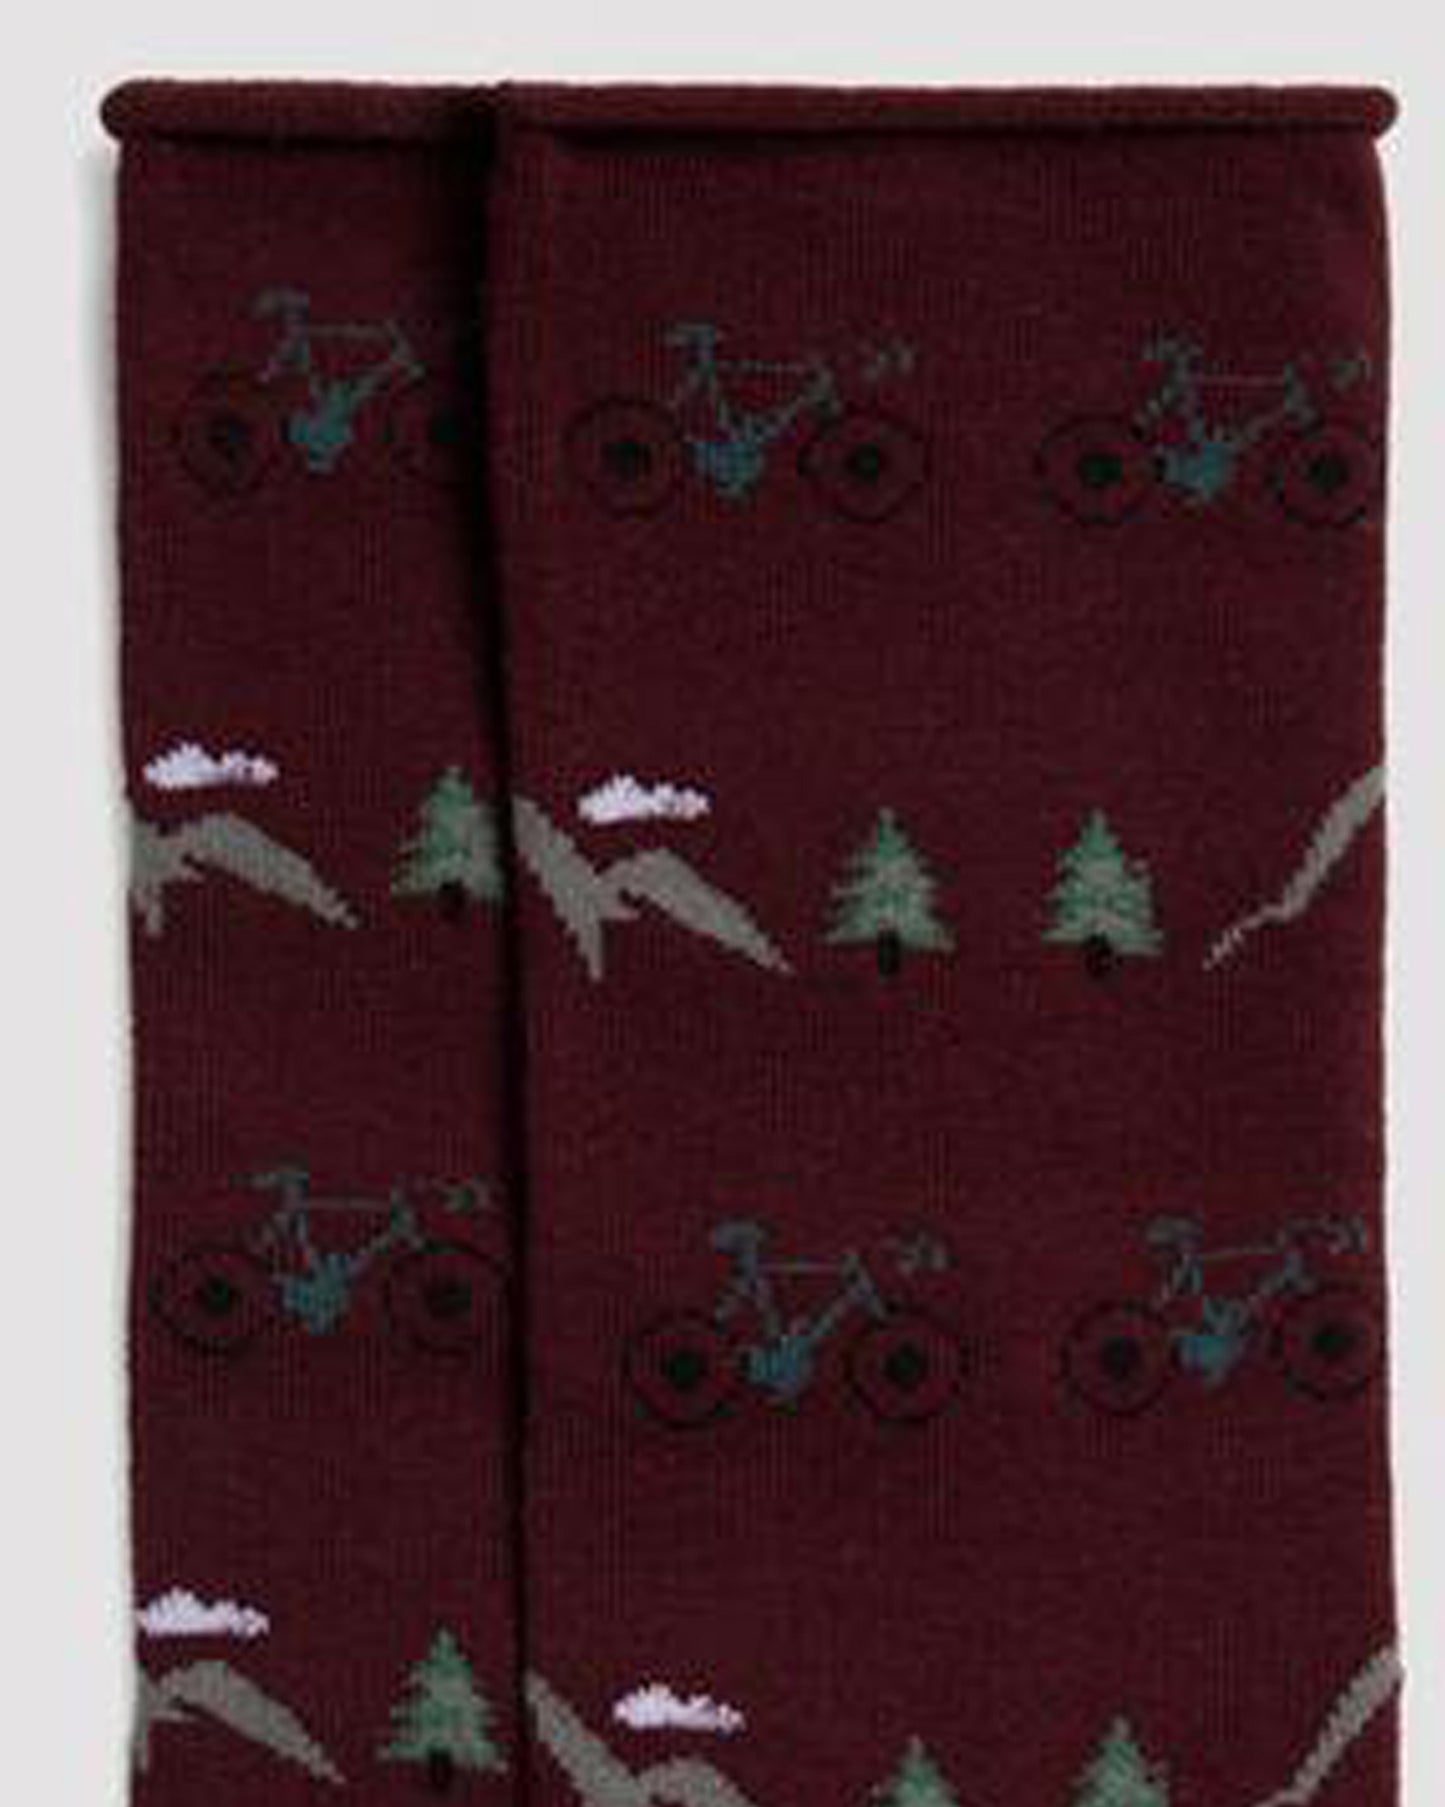 Ysabel Mora 22877 Mountain Bike Sock - Wine cotton mix crew length ankle socks with a mountain bike themed pattern of mountains, trees and bicycles in shades of green, grey and black and a no cuff roll top.